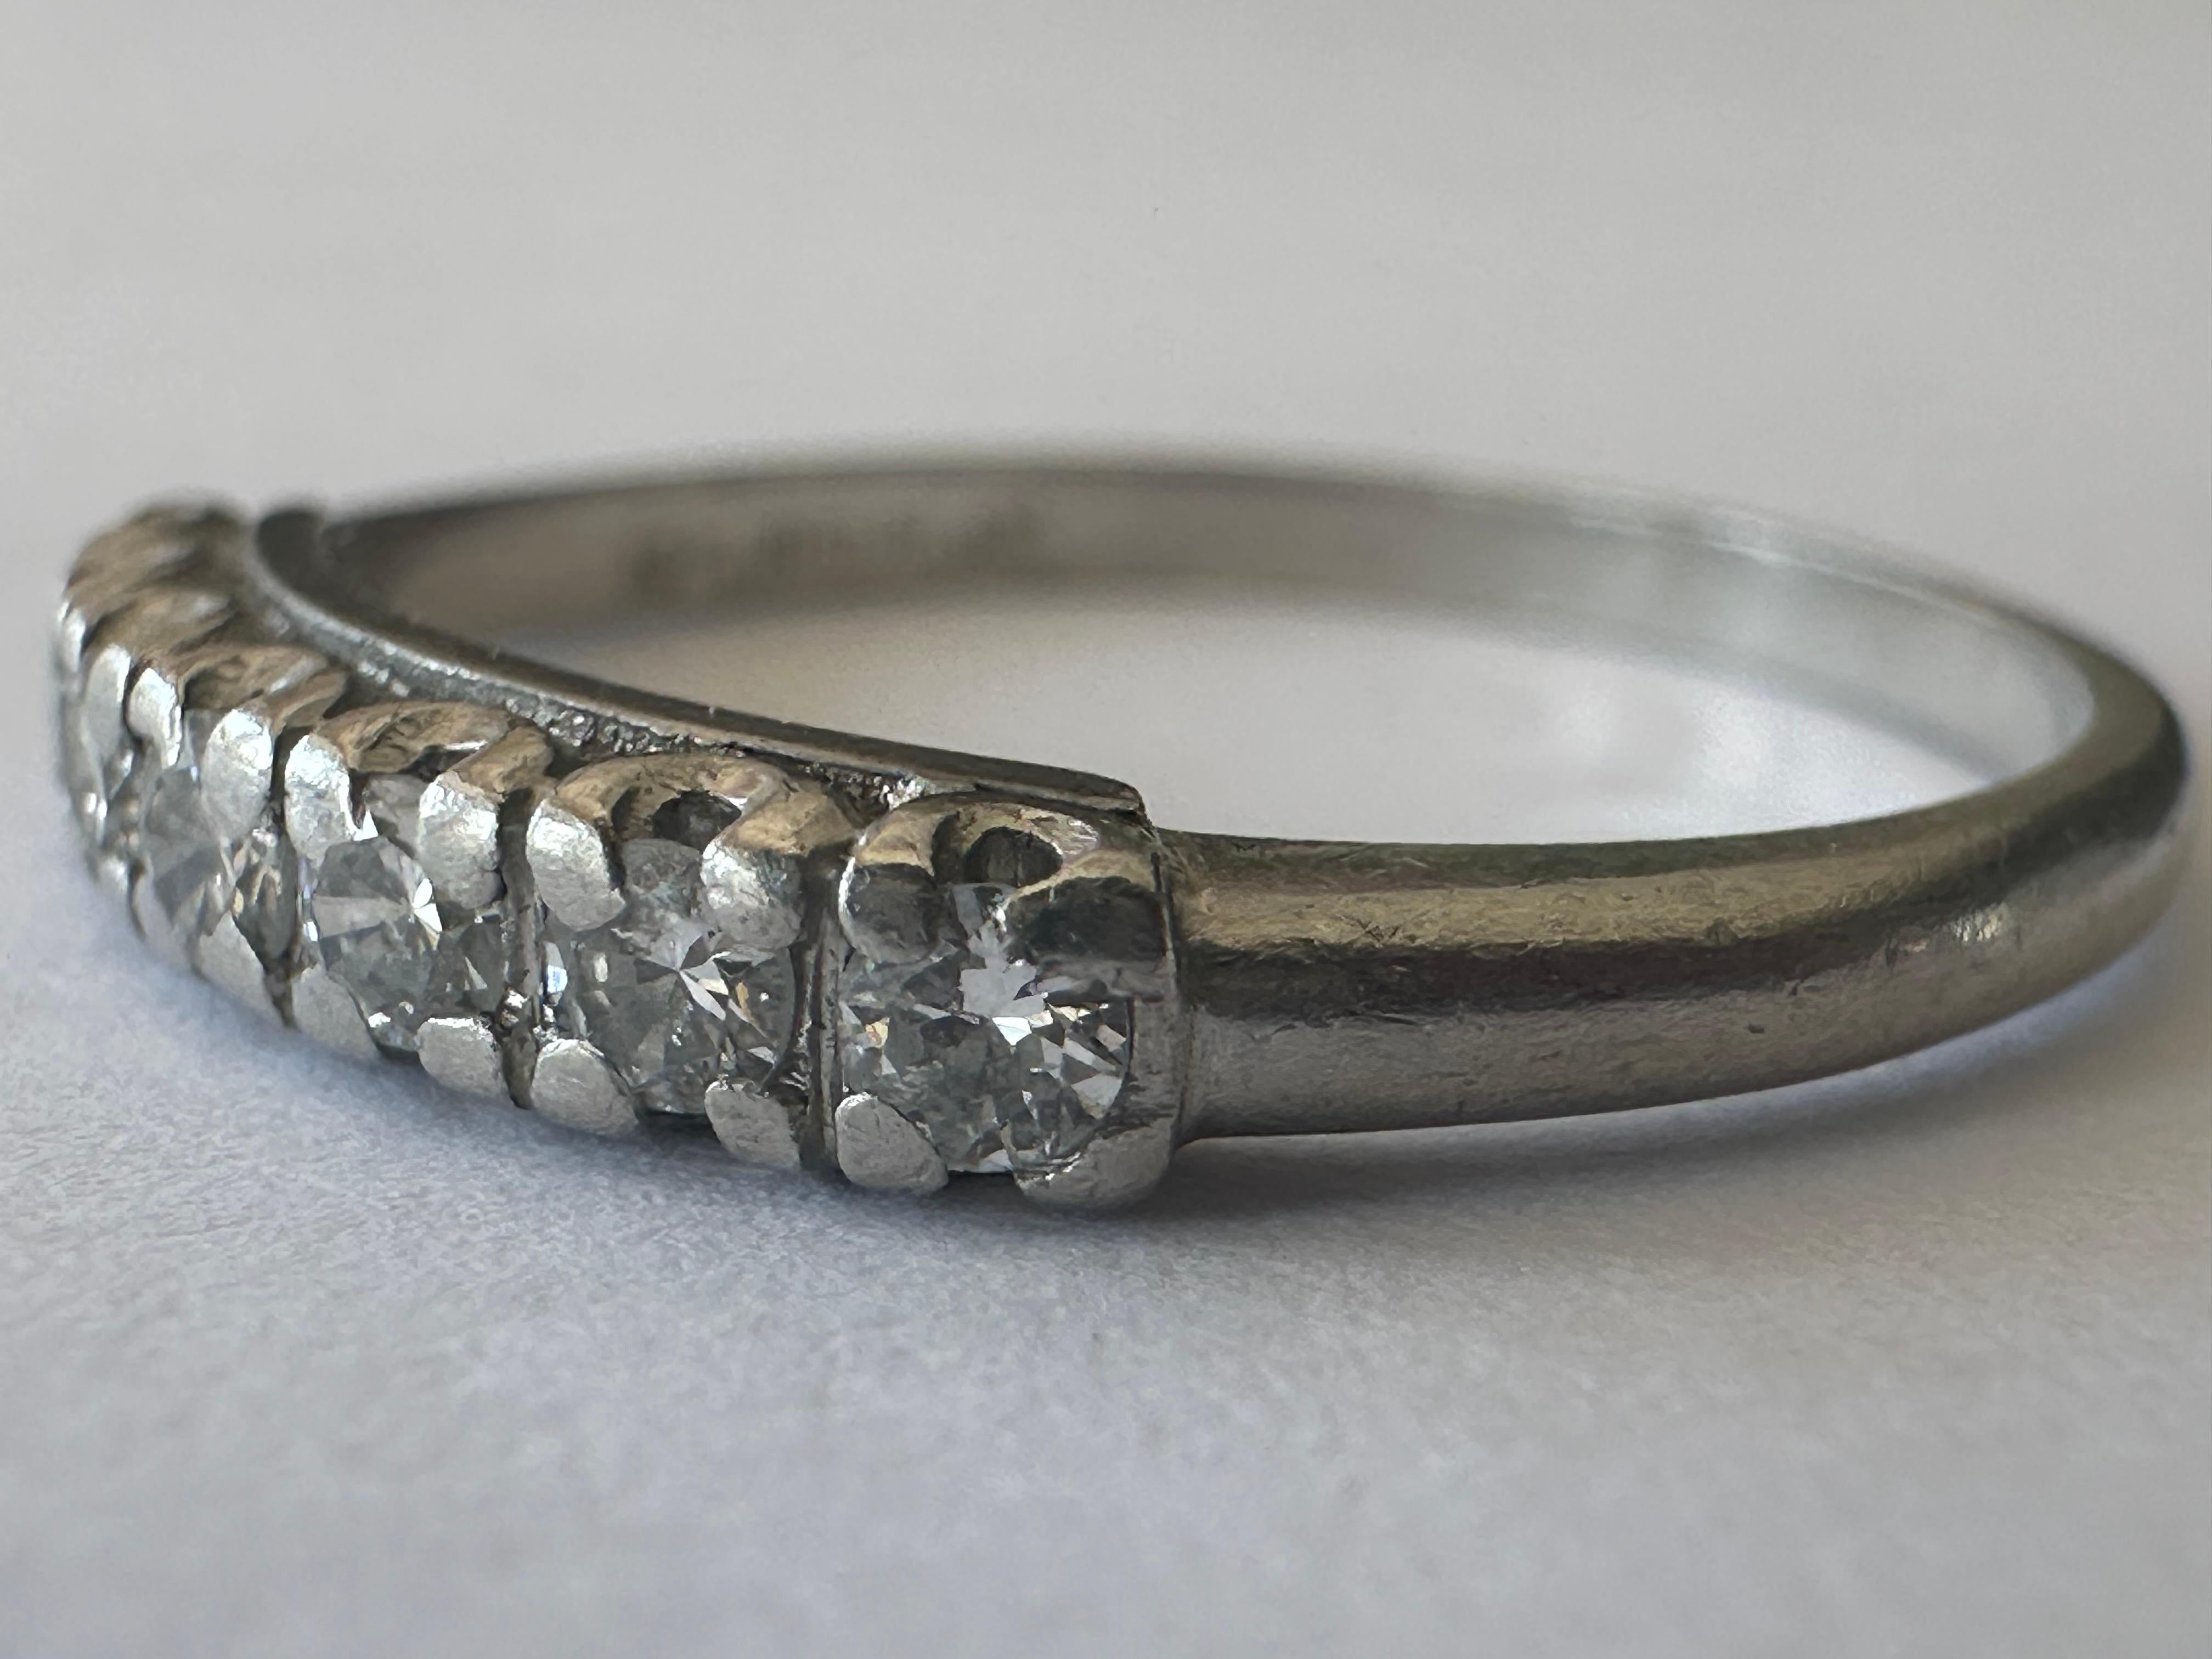 Seven round diamonds totaling approximately 0.15 carats F color SI1 clarity shimmer across the top of this classic mid-century band handcrafted in platinum. The width of the top of the band measures 3.1mm. 